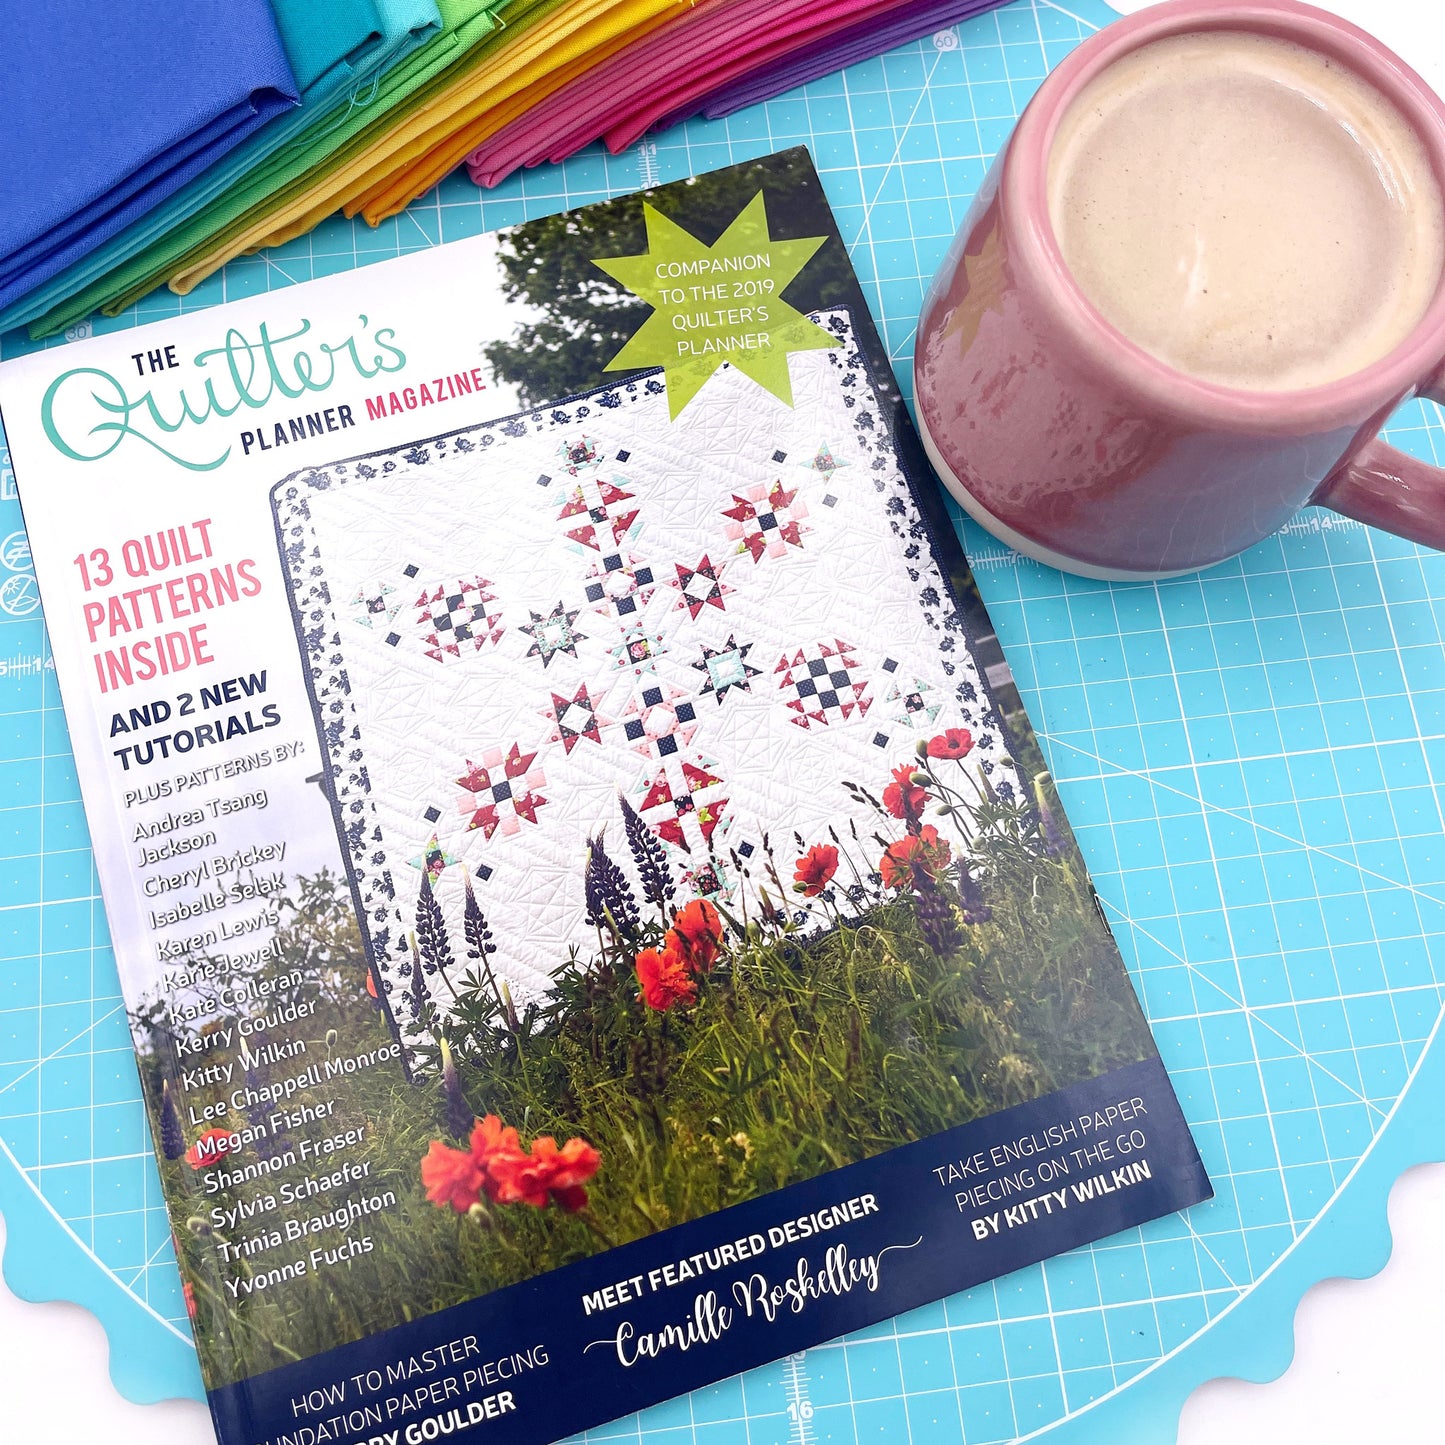 2019 Quilter's Planner Magazine: 12 sewing patterns inside